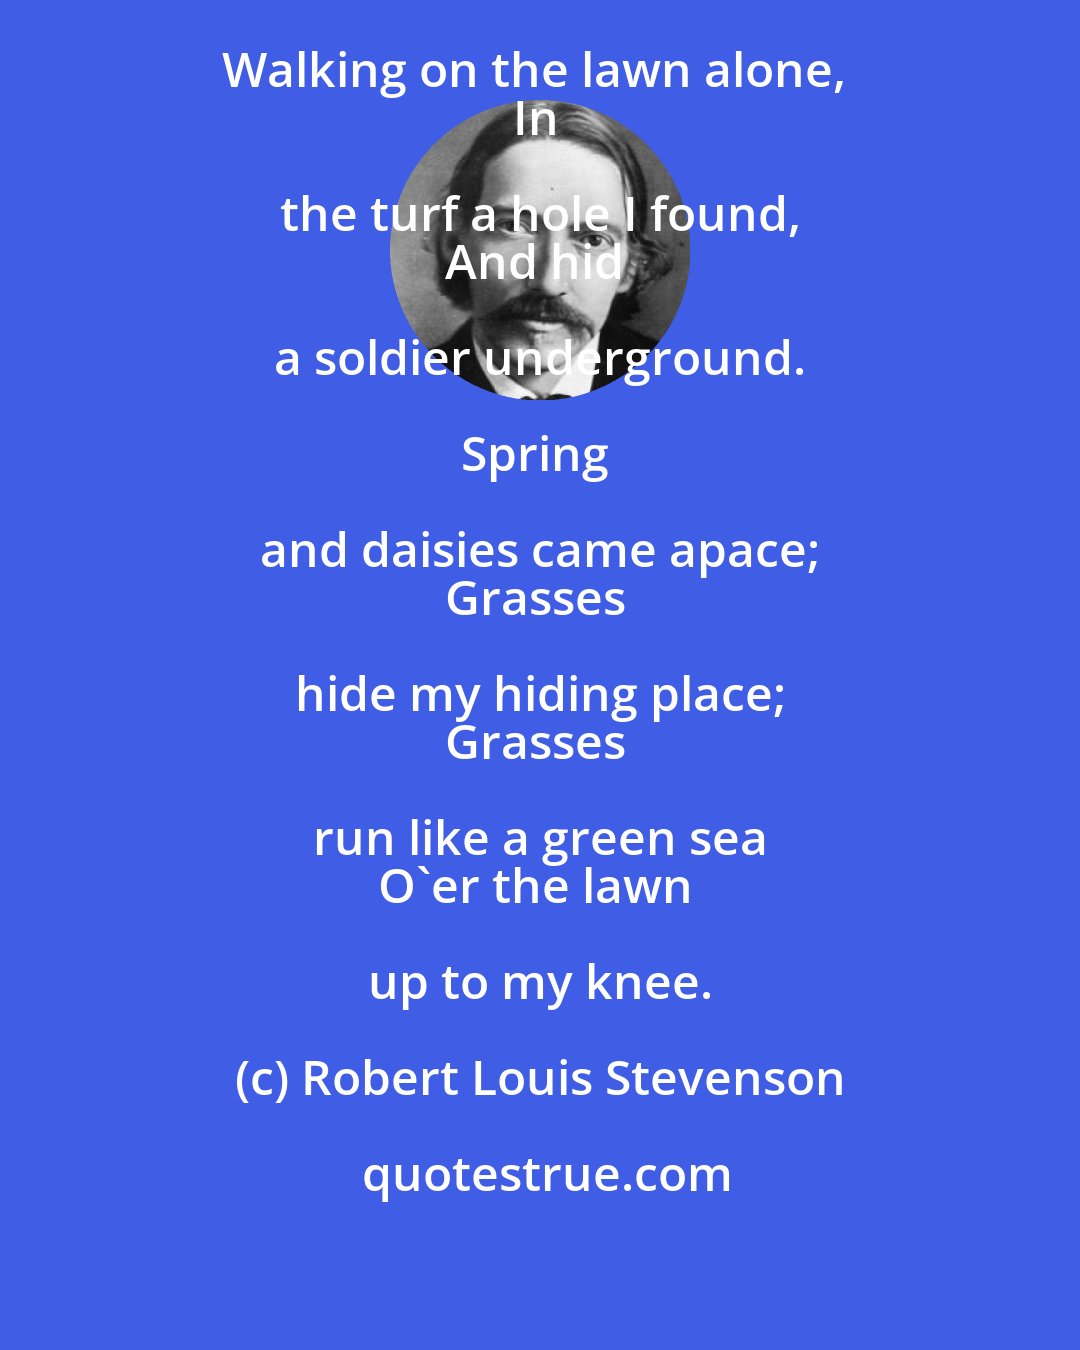 Robert Louis Stevenson: When the grass was closely mown, 
Walking on the lawn alone, 
In the turf a hole I found, 
And hid a soldier underground. 

Spring and daisies came apace; 
Grasses hide my hiding place; 
Grasses run like a green sea 
O'er the lawn up to my knee.